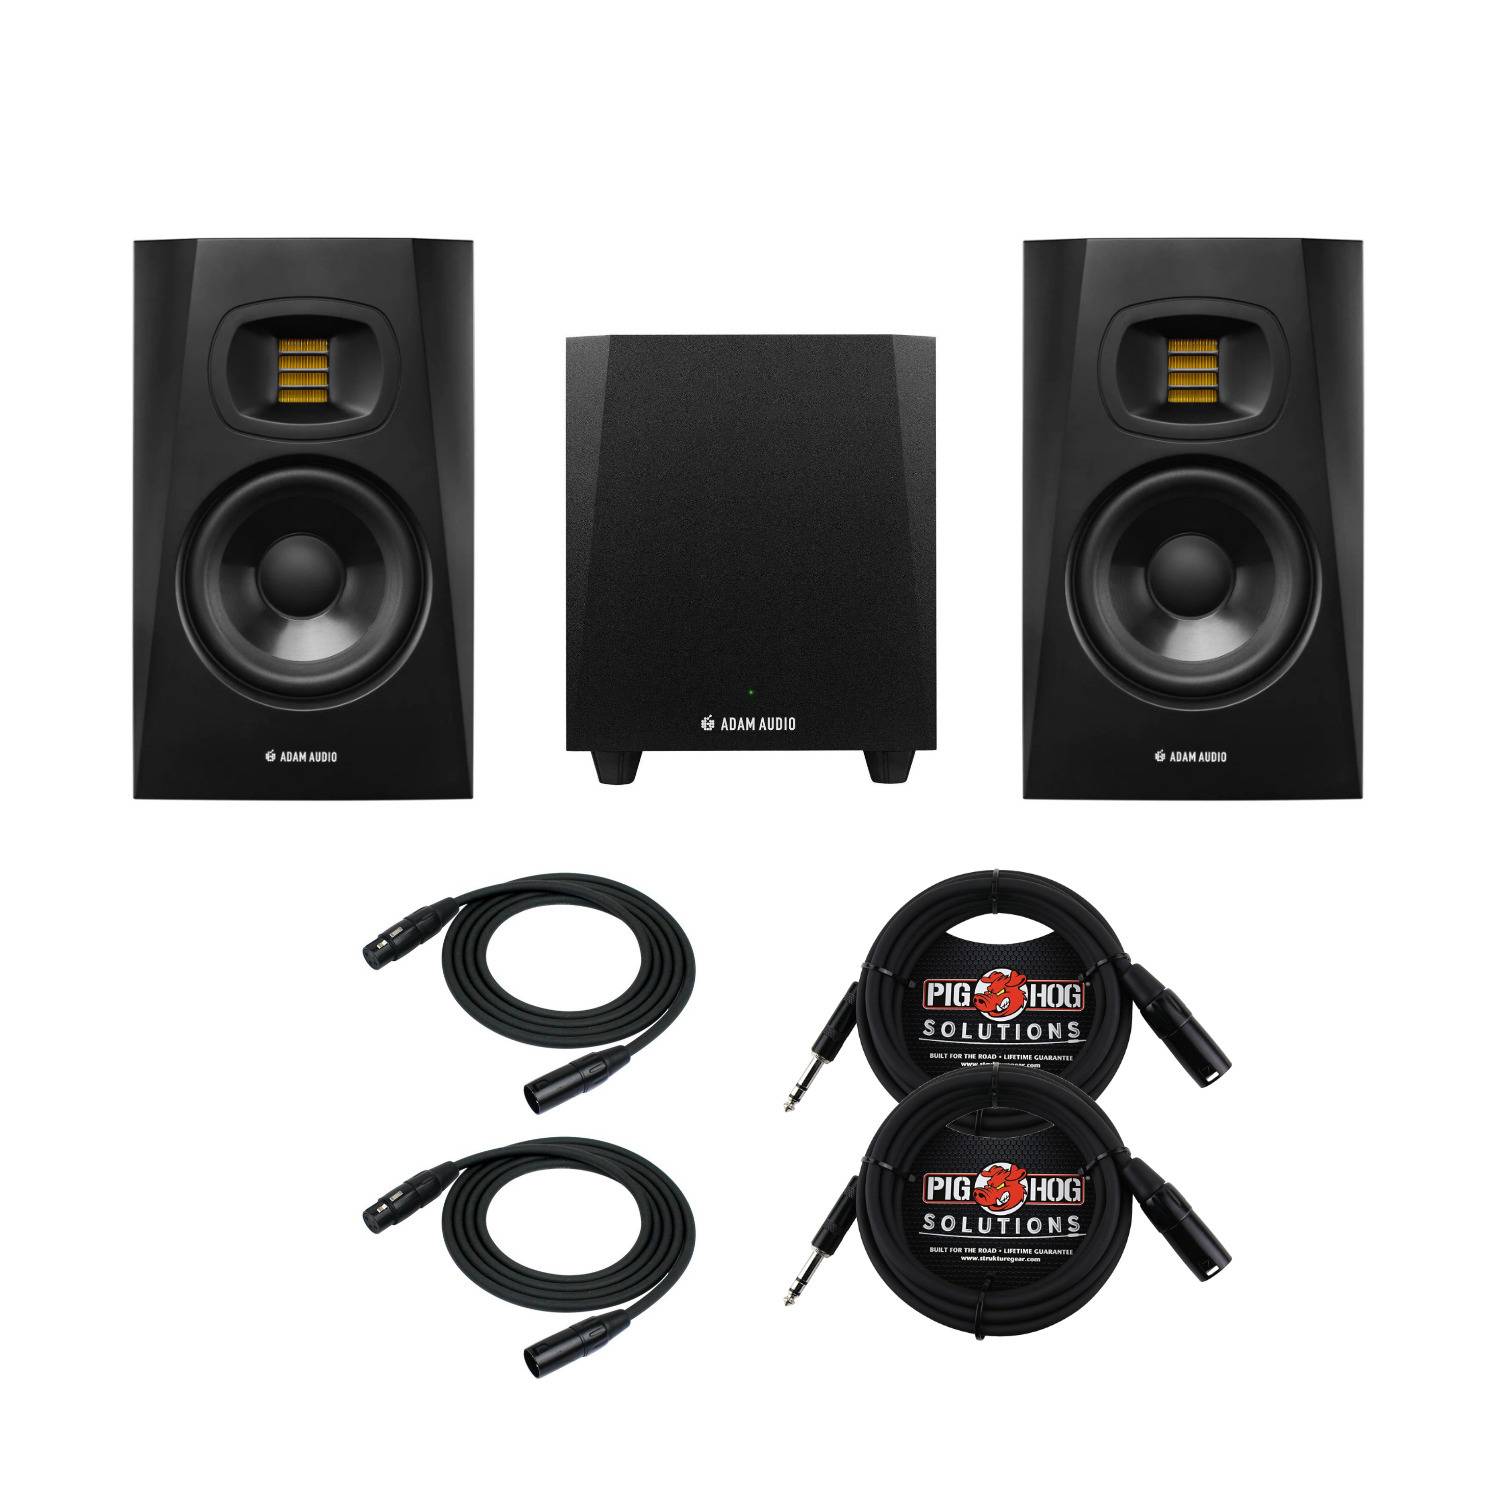 ADAM Audio T7V Monitor (Pair) with ADAM Audio T10S Subwoofer, XLR Cables and TRS Cables